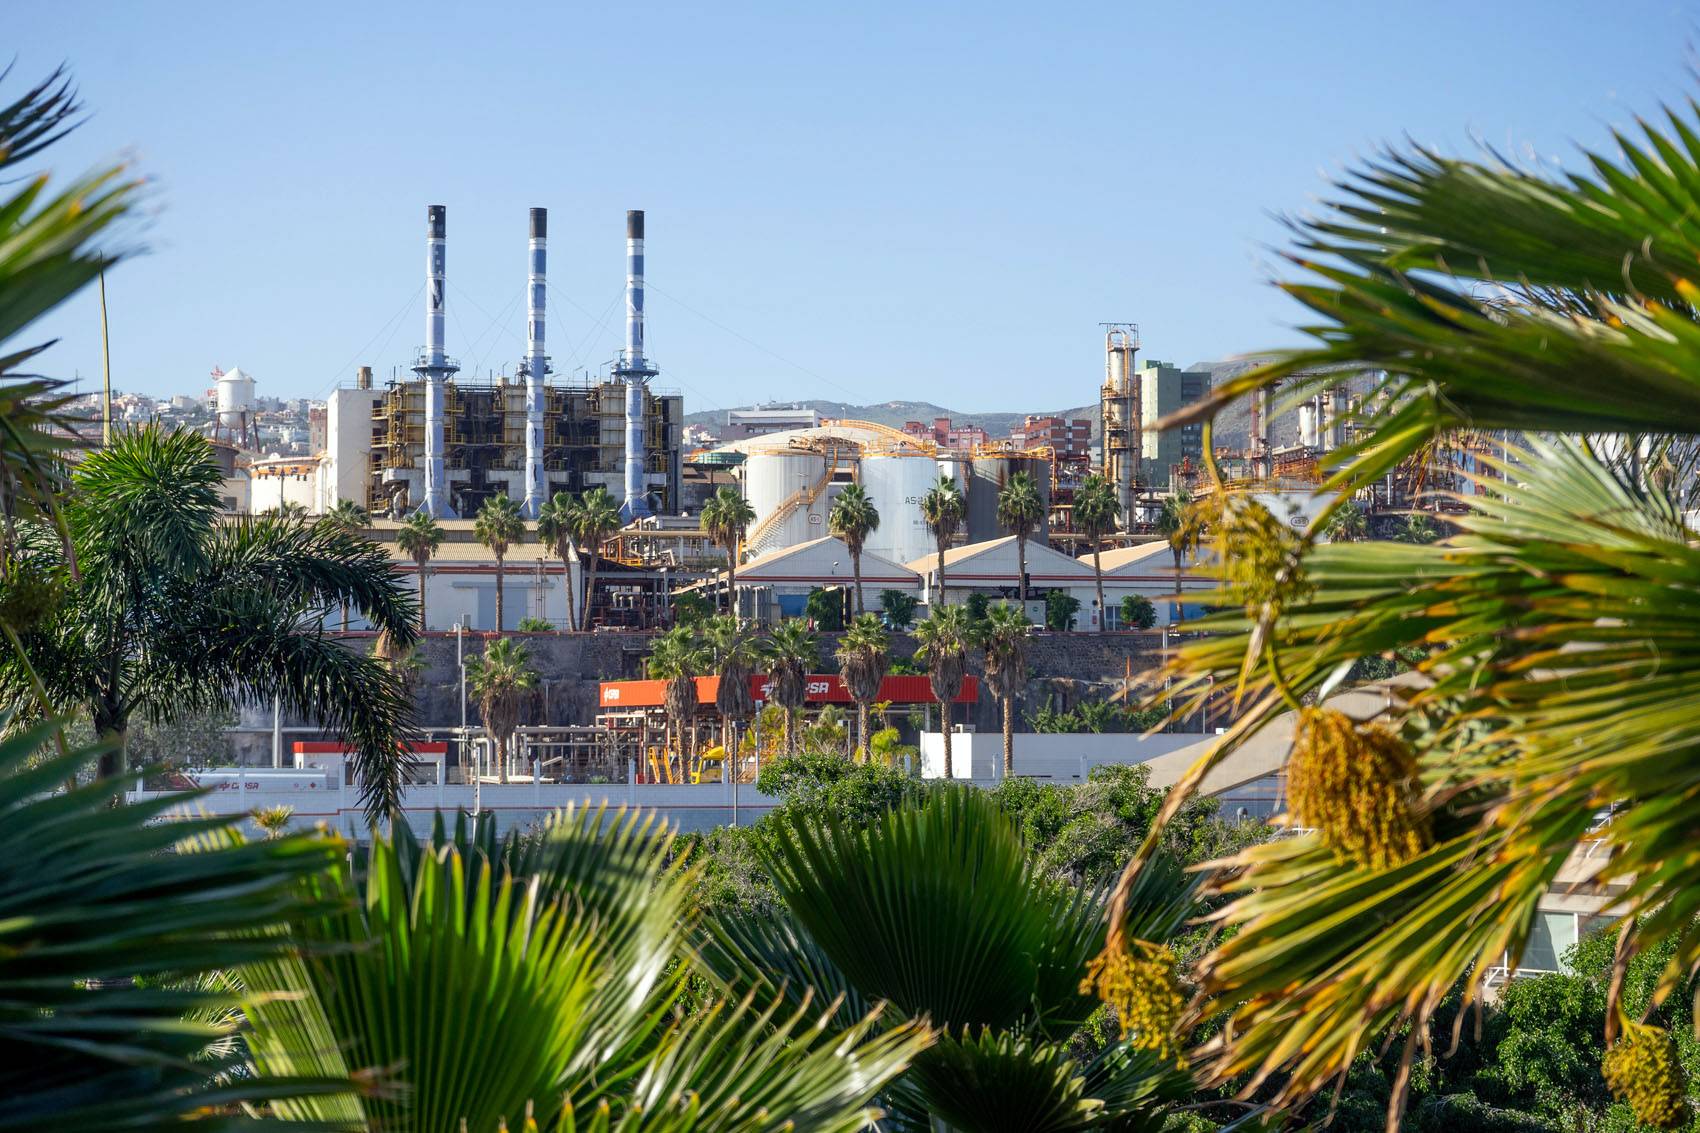 The Palmetum and the nearby refinery